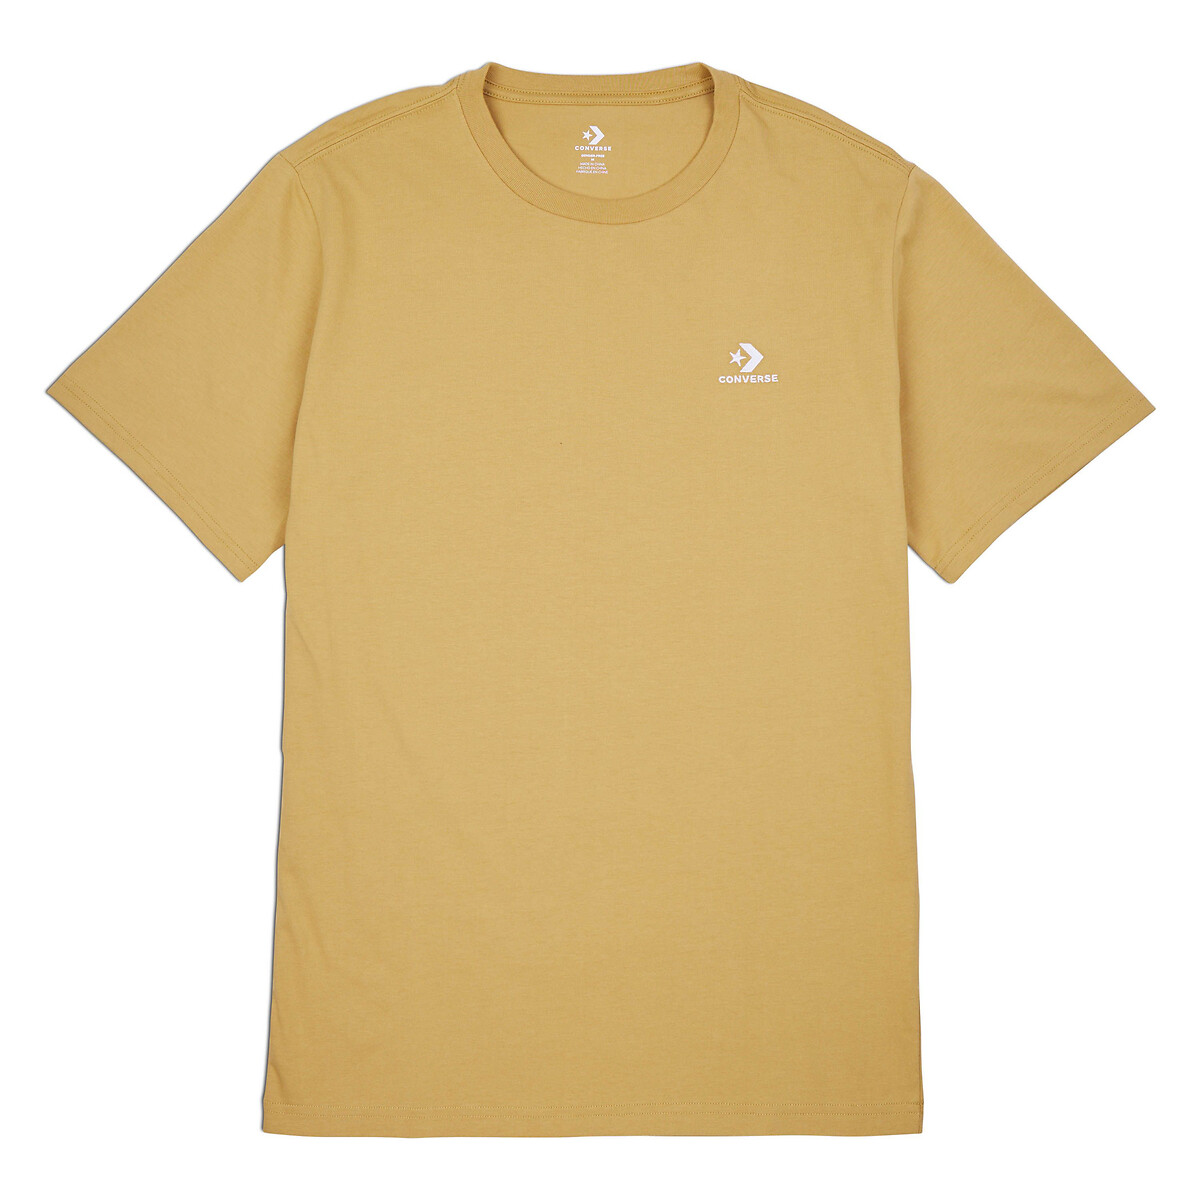 Image of Star Chevron Unisex T-Shirt with Embroidered Logo and Short Sleeves in Cotton